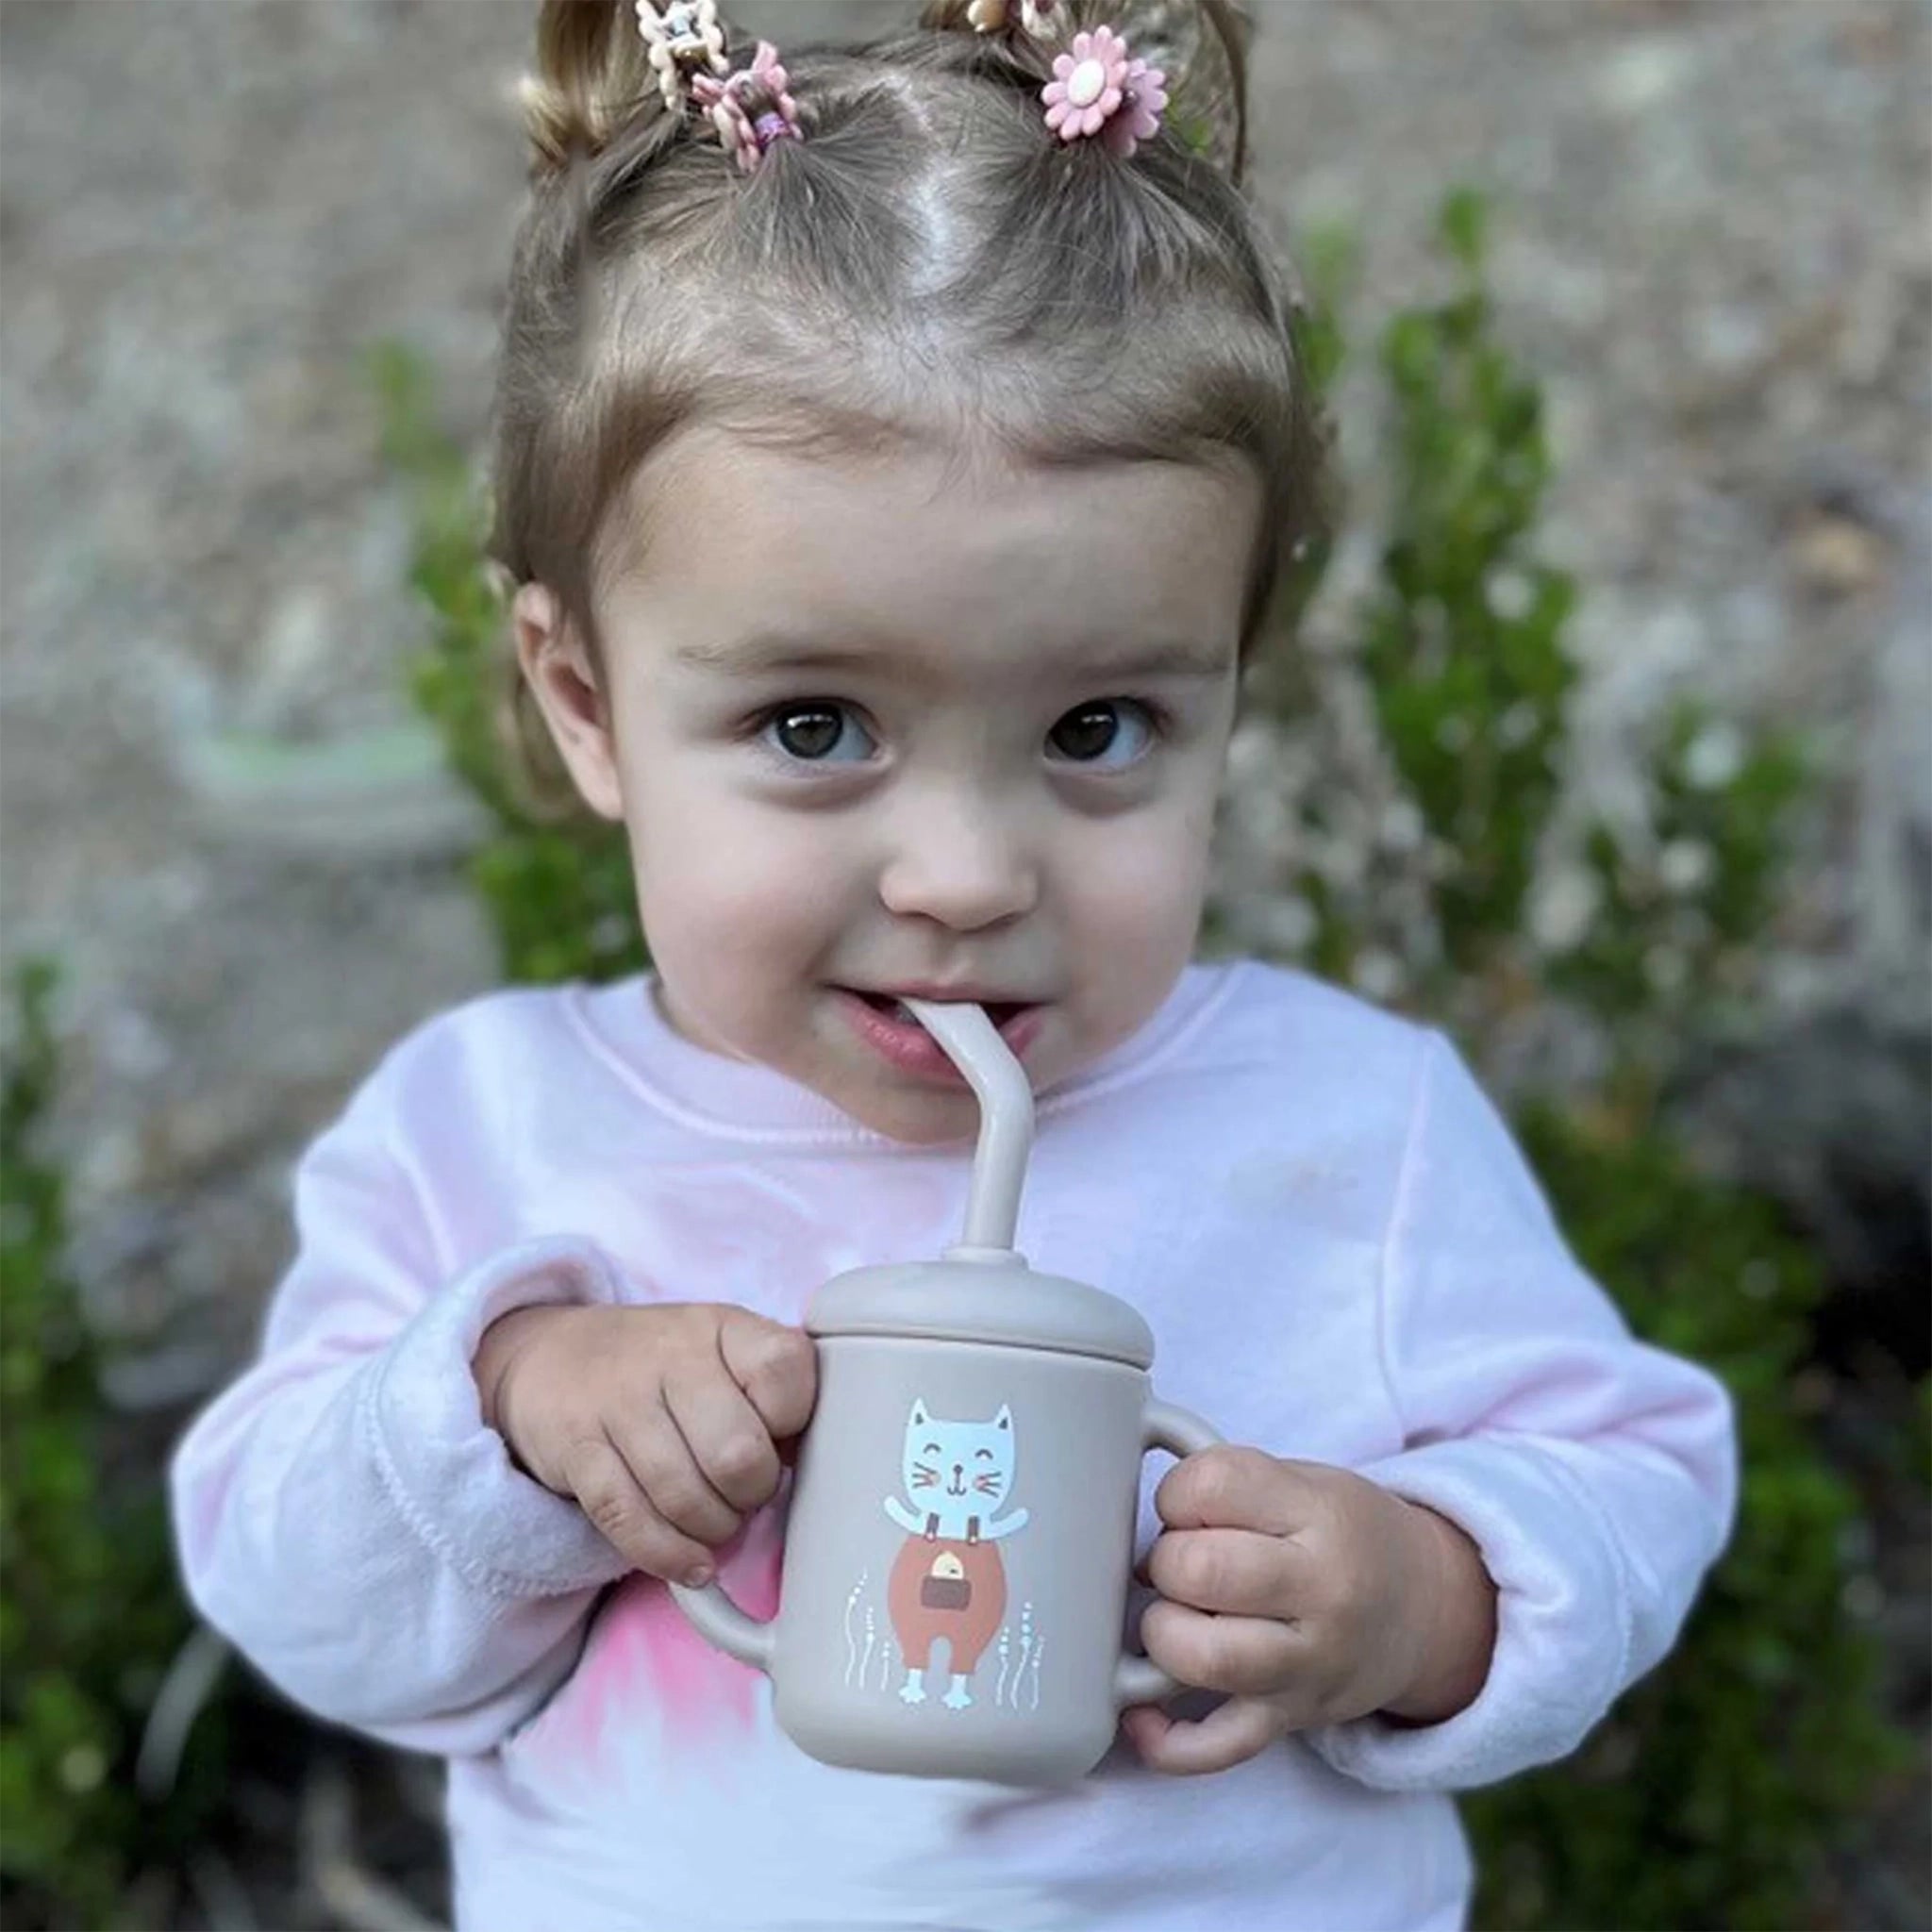 On a cream background is a light pink sippy cup with two handles and straw, designed with a white kitten illustration on the front held by a toddler. 